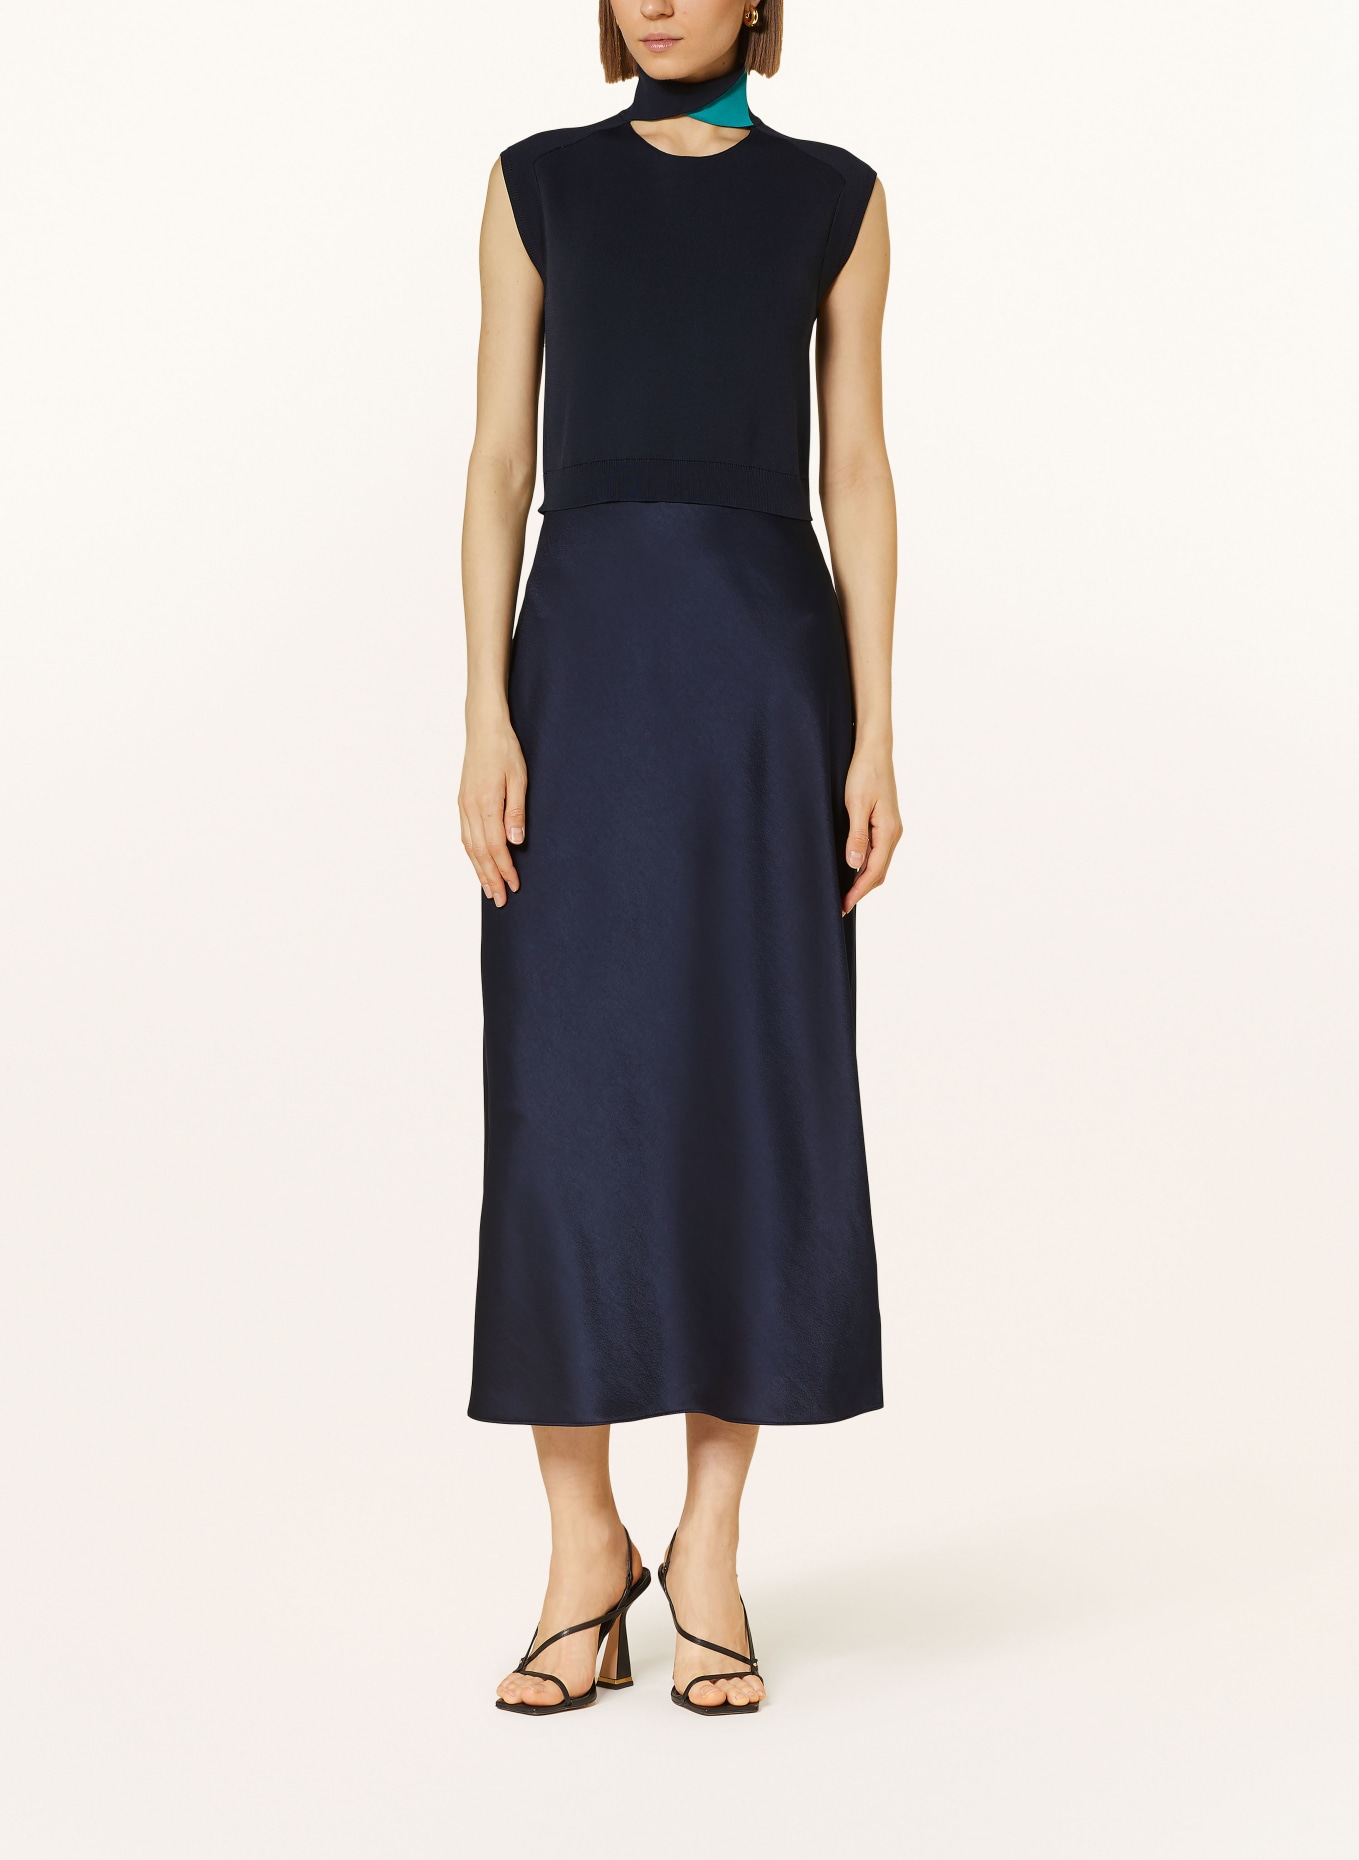 TED BAKER Dress PAOLLA in mixed materials with cut-out, Color: DARK BLUE (Image 2)